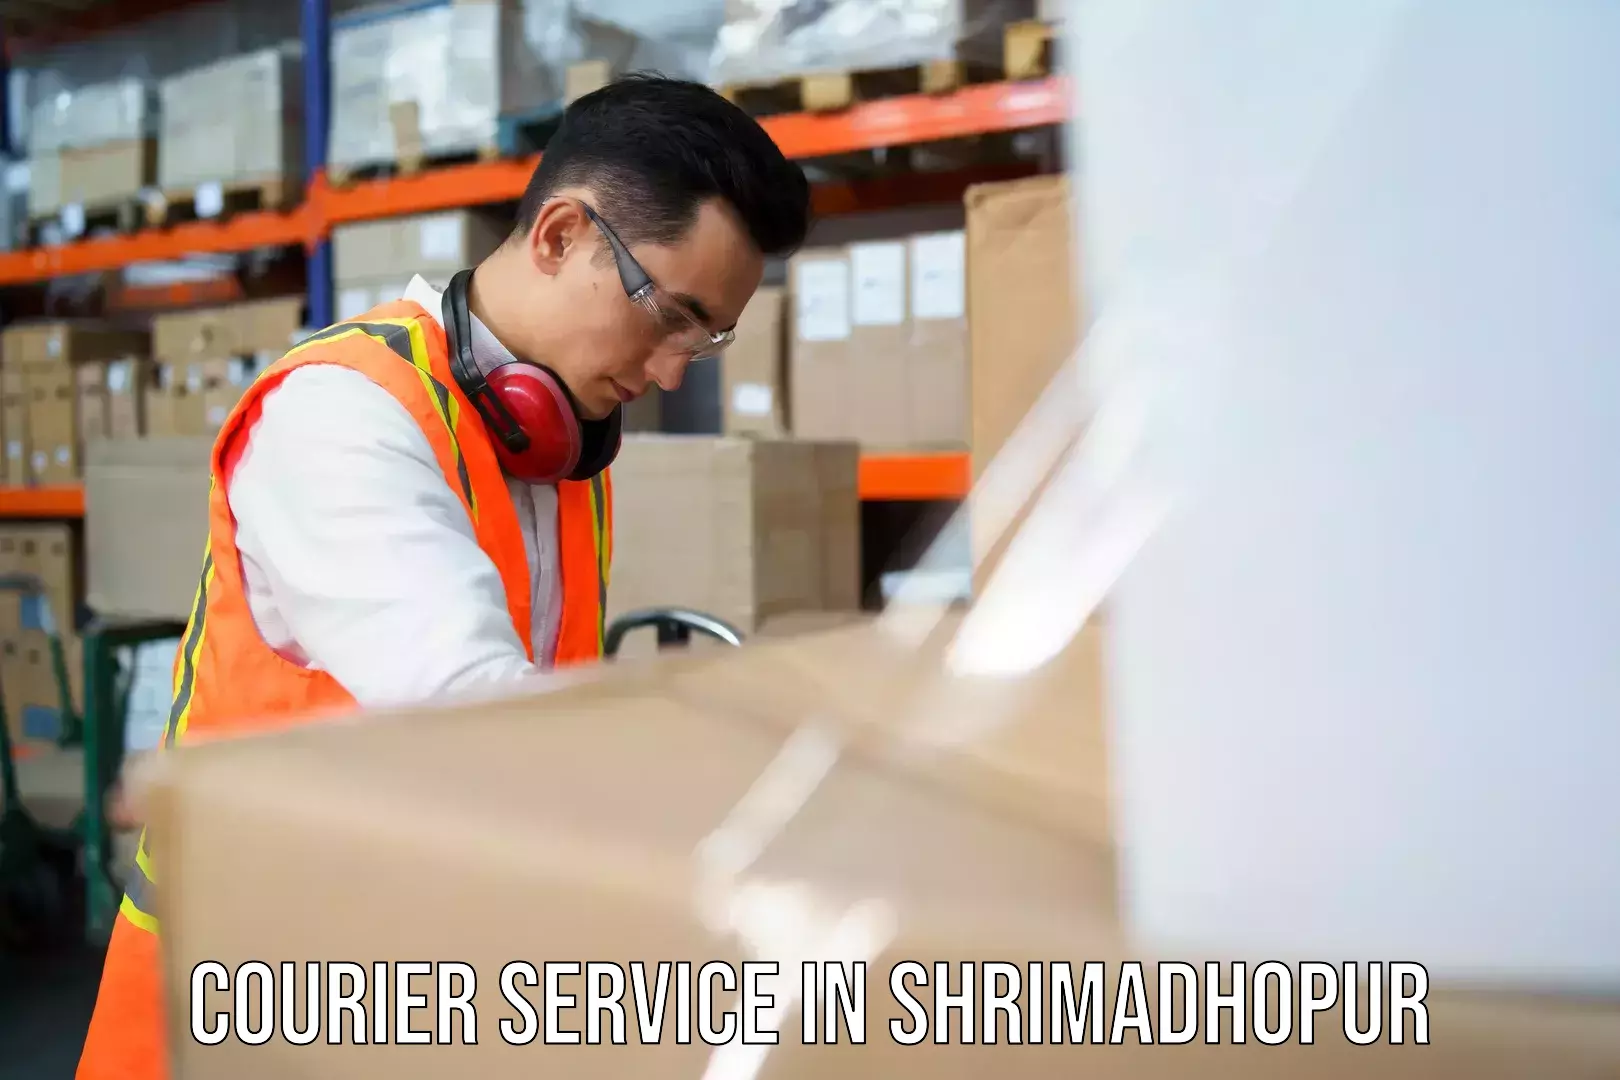 On-call courier service in Shrimadhopur